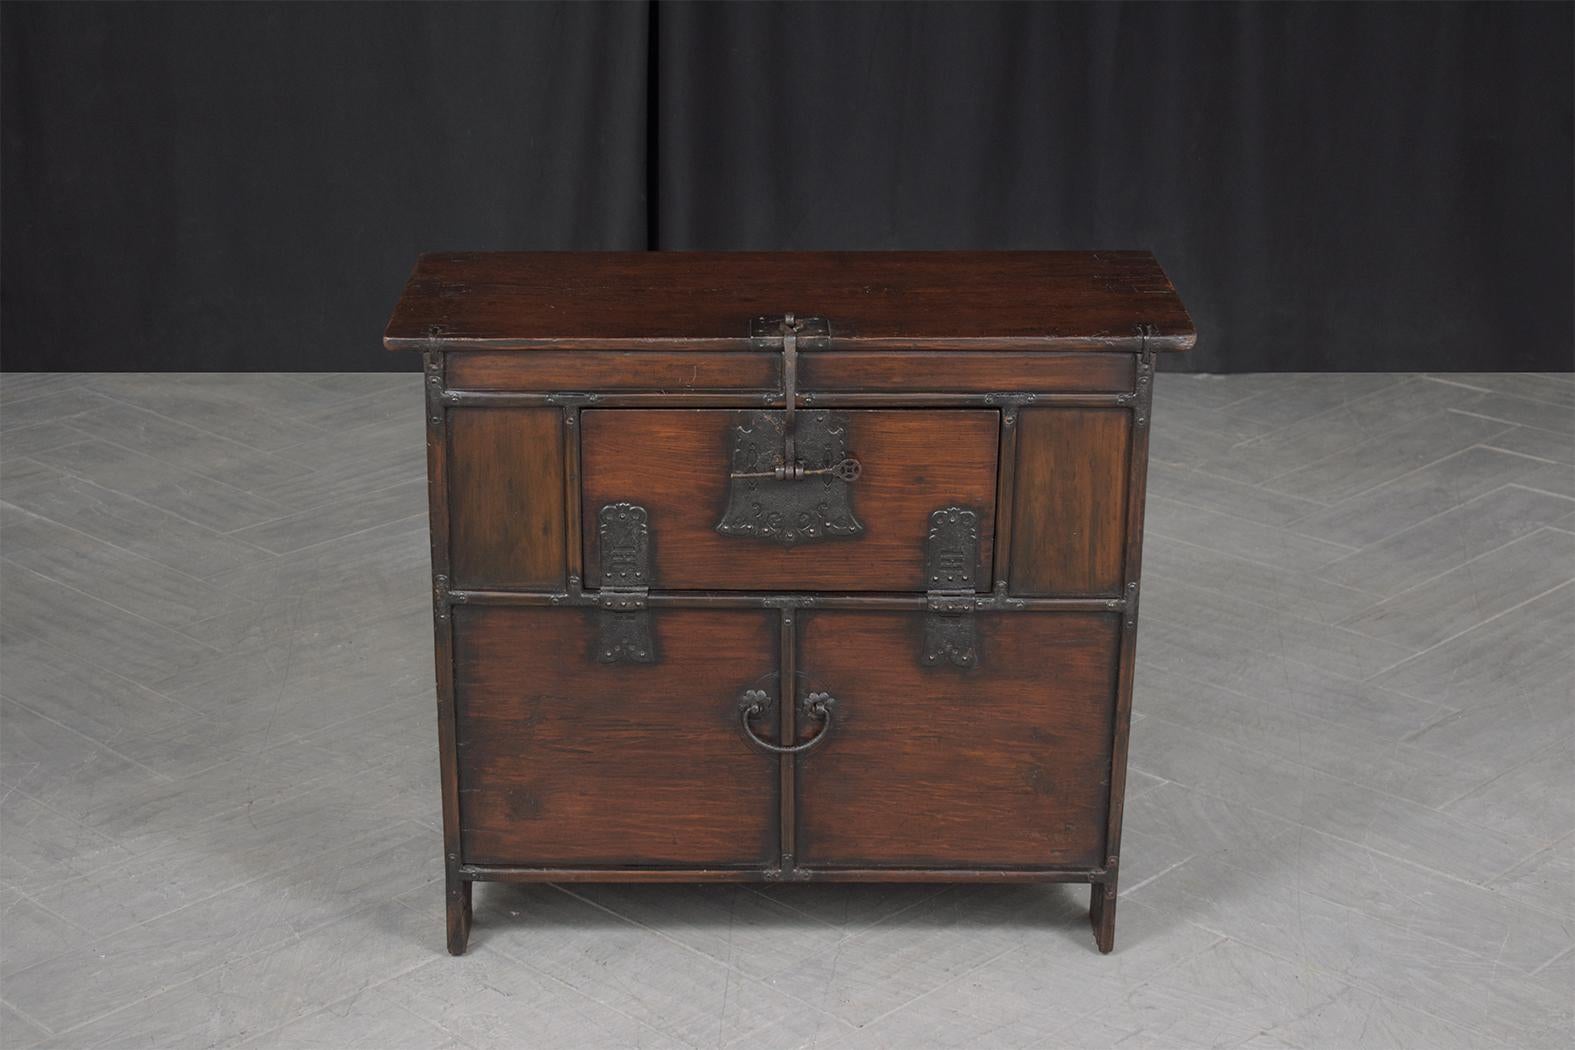 Japonisme 1900s Antique Japanese Elm Wood Cabinet with Iron Hardware & Patina Finish For Sale